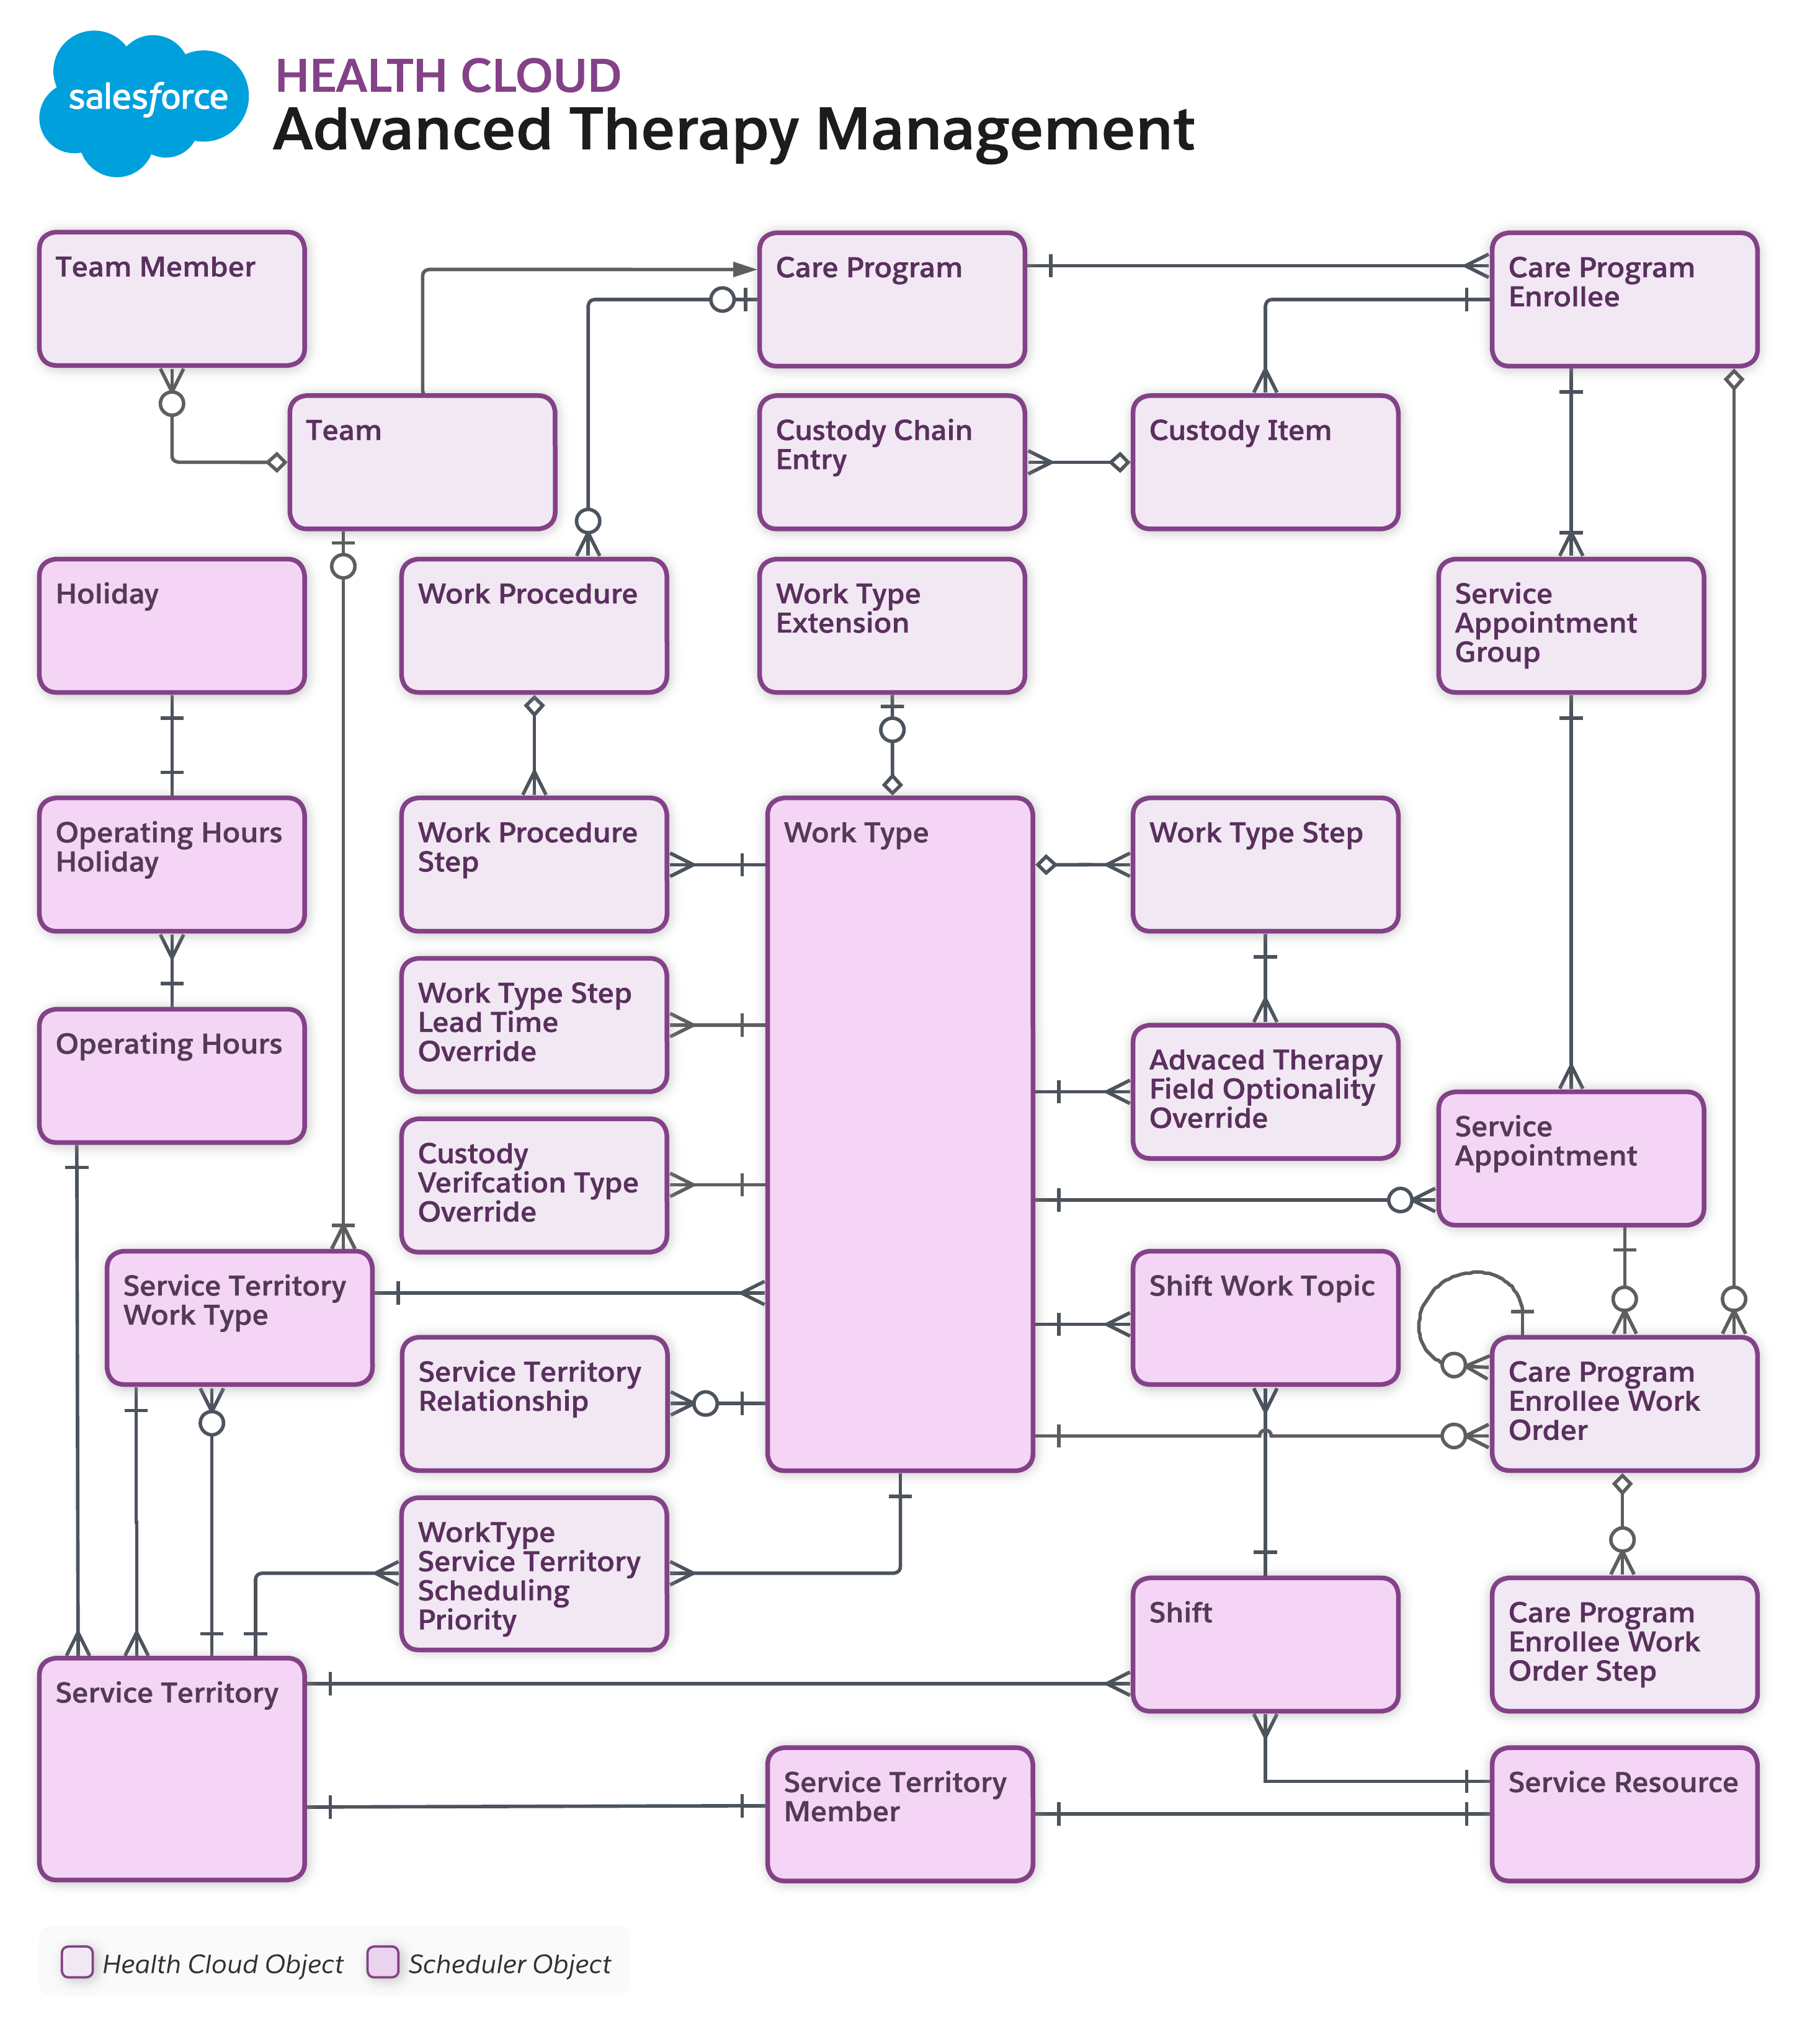 Advanced Therapy Management